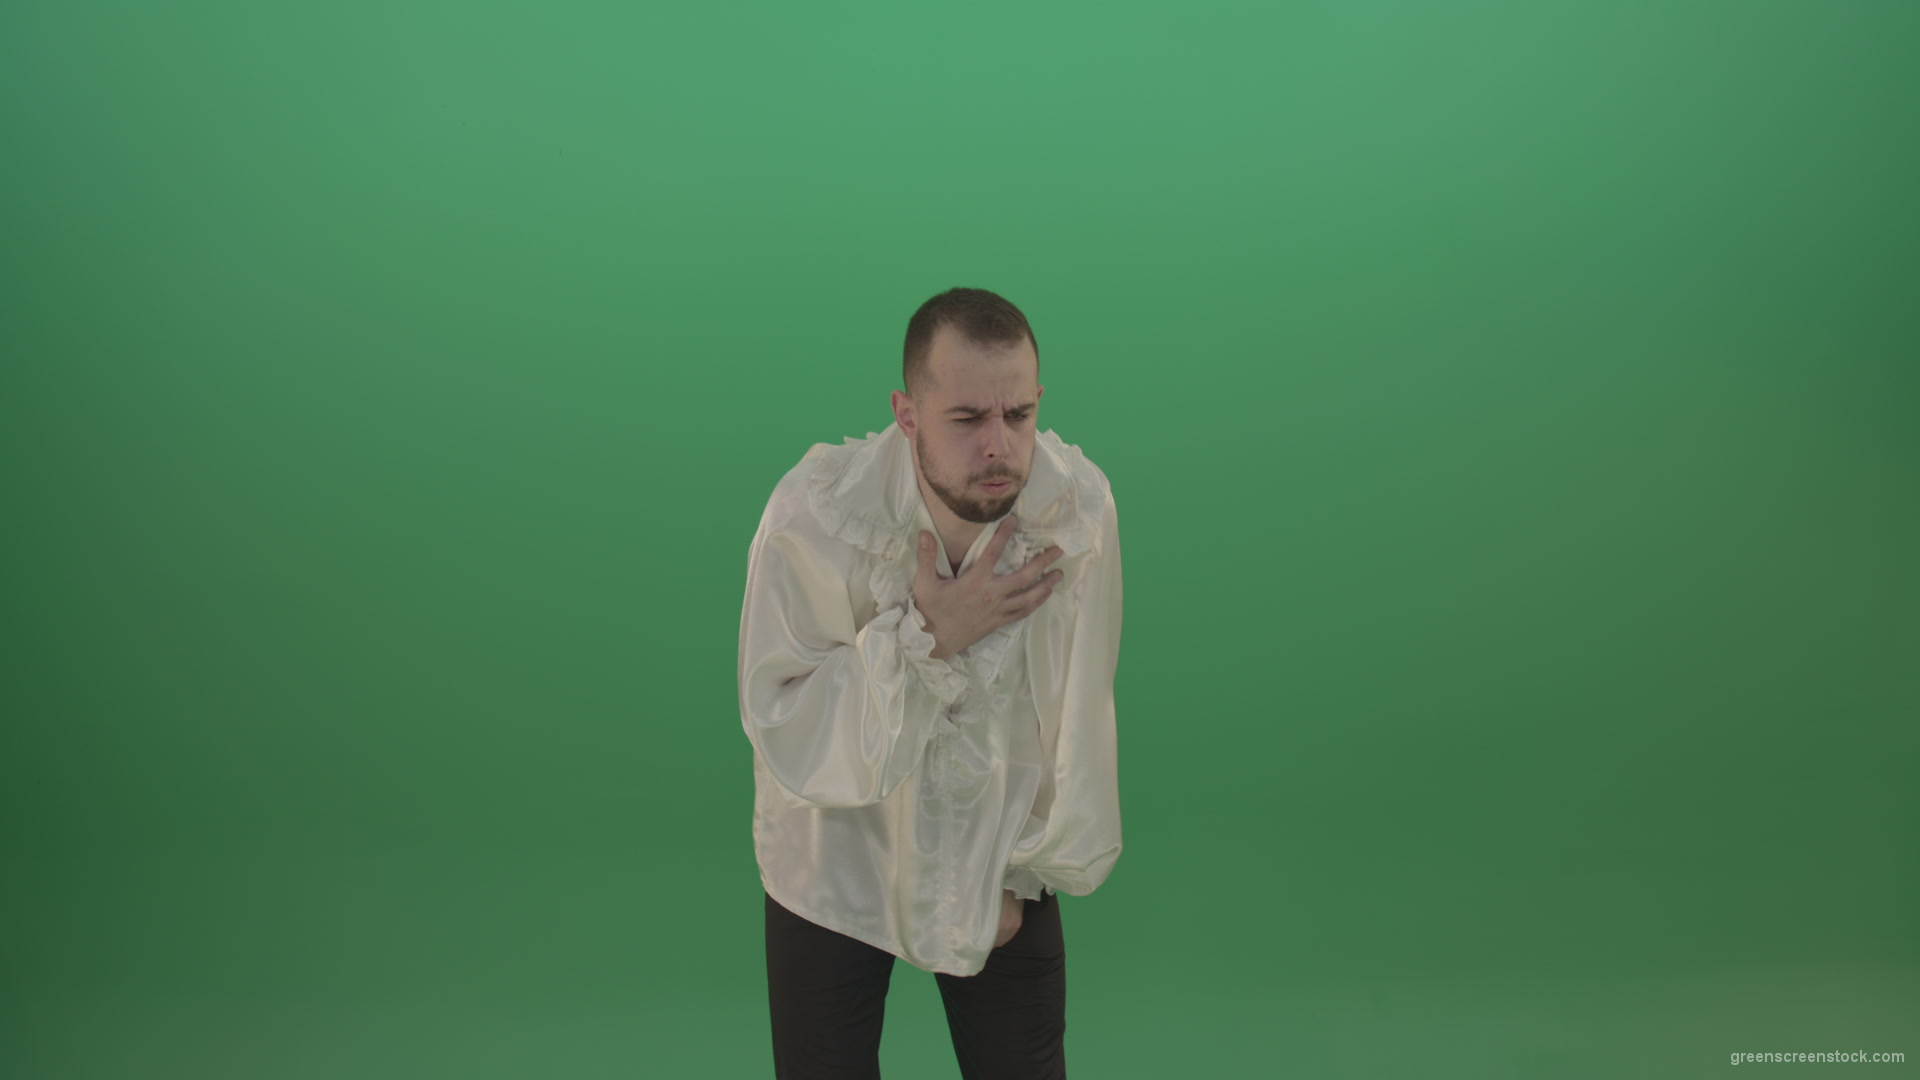 Man-is-very-coughing-infected-with-a-virus-isolated-on-chromakey-background_005 Green Screen Stock